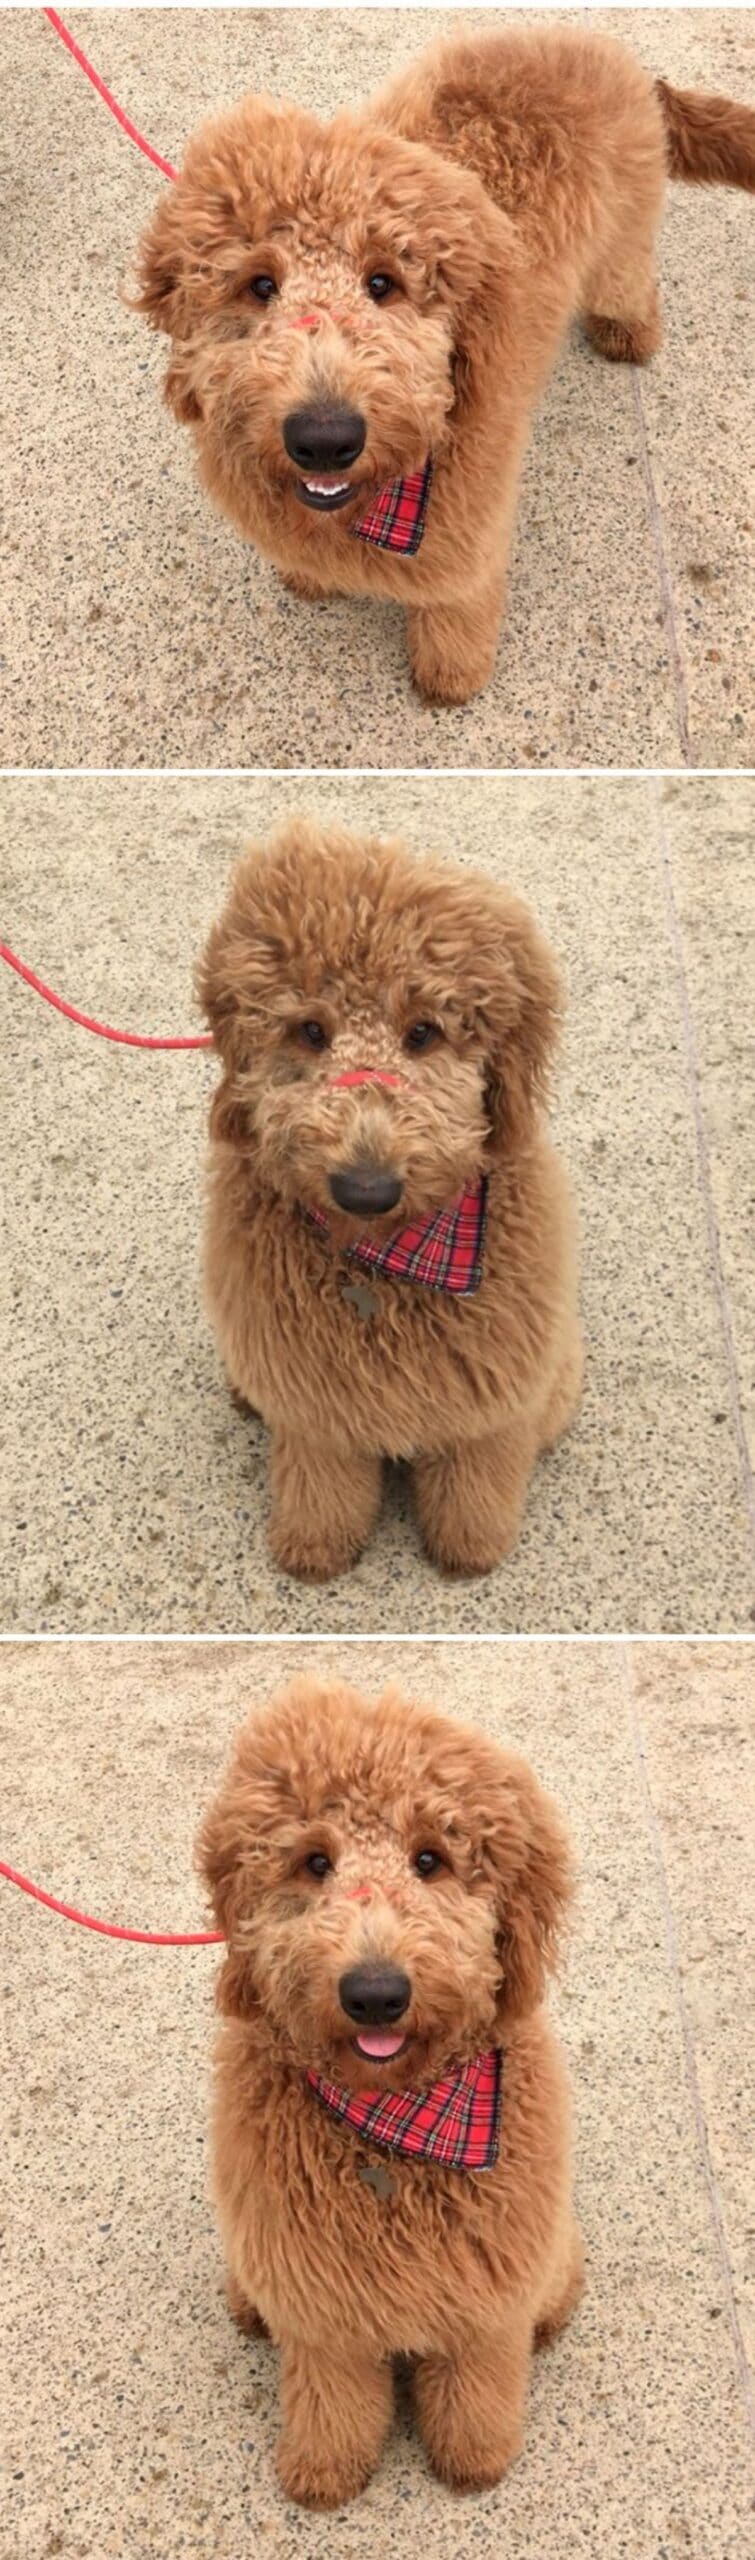 3 photos of a brown poodle sitting on the floor and smiling